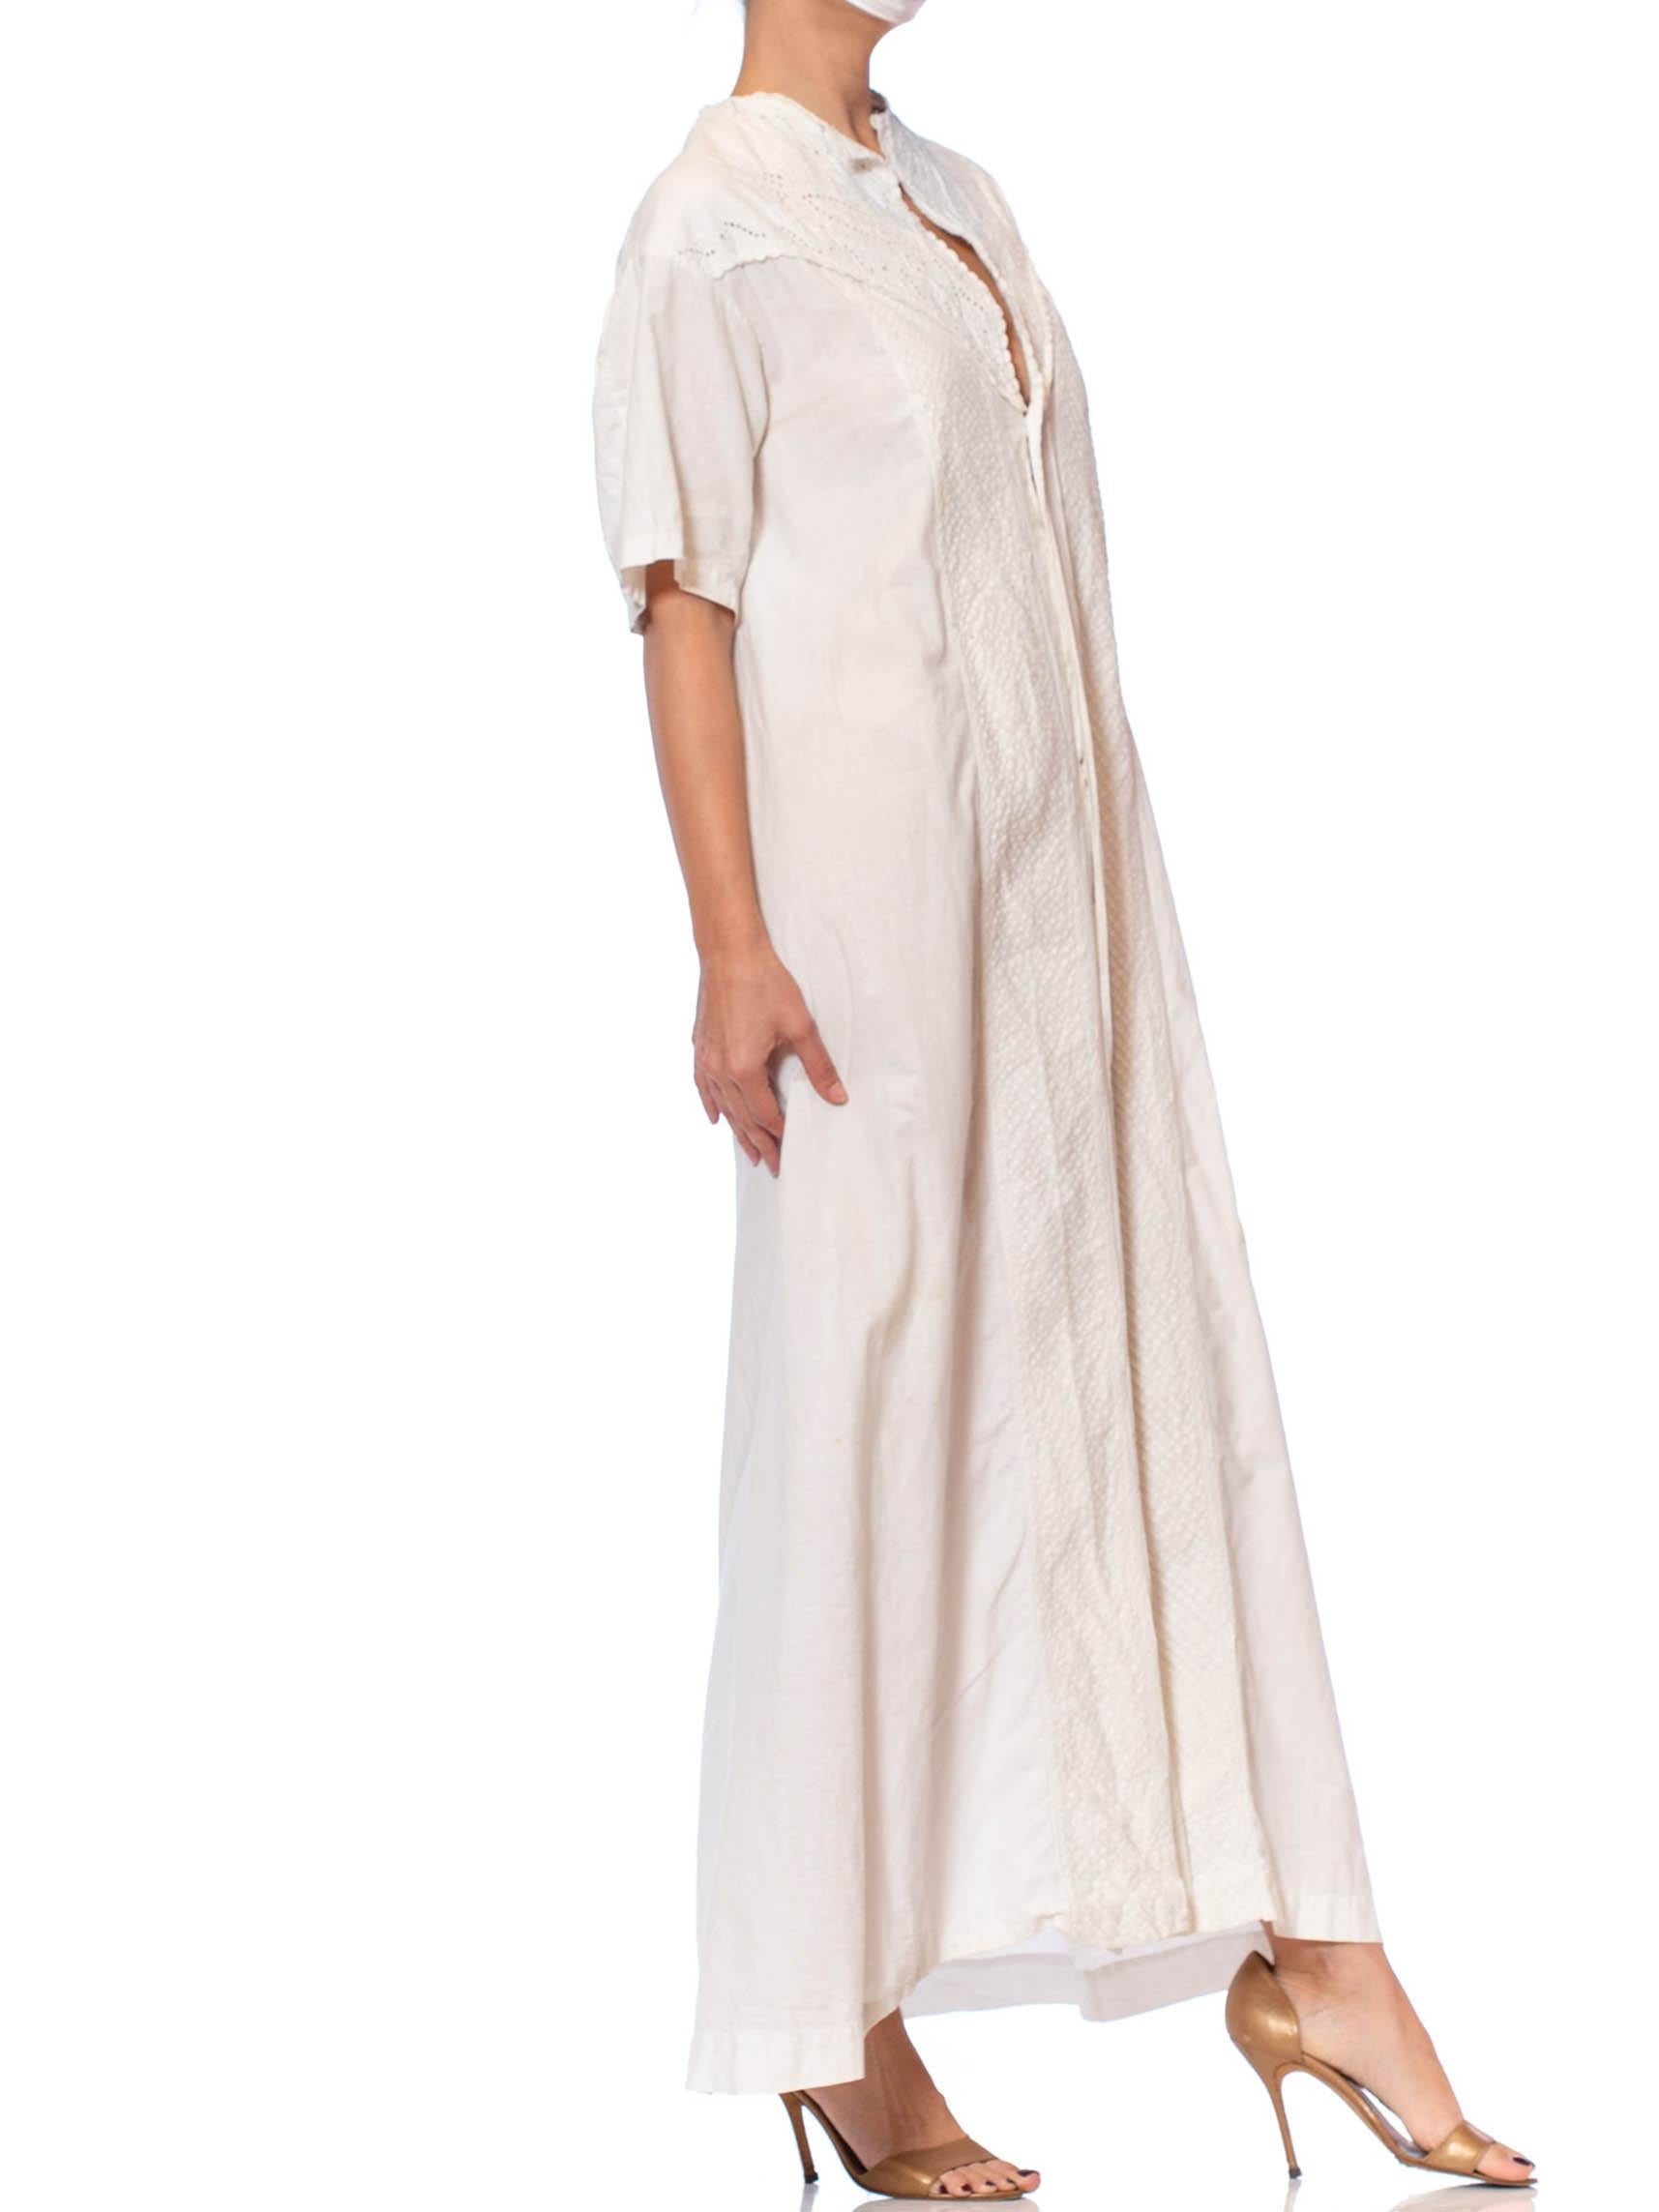 Victorian Off White Hand Embroidered Organic Linen Short Sleeve Nightgown Duste For Sale 2